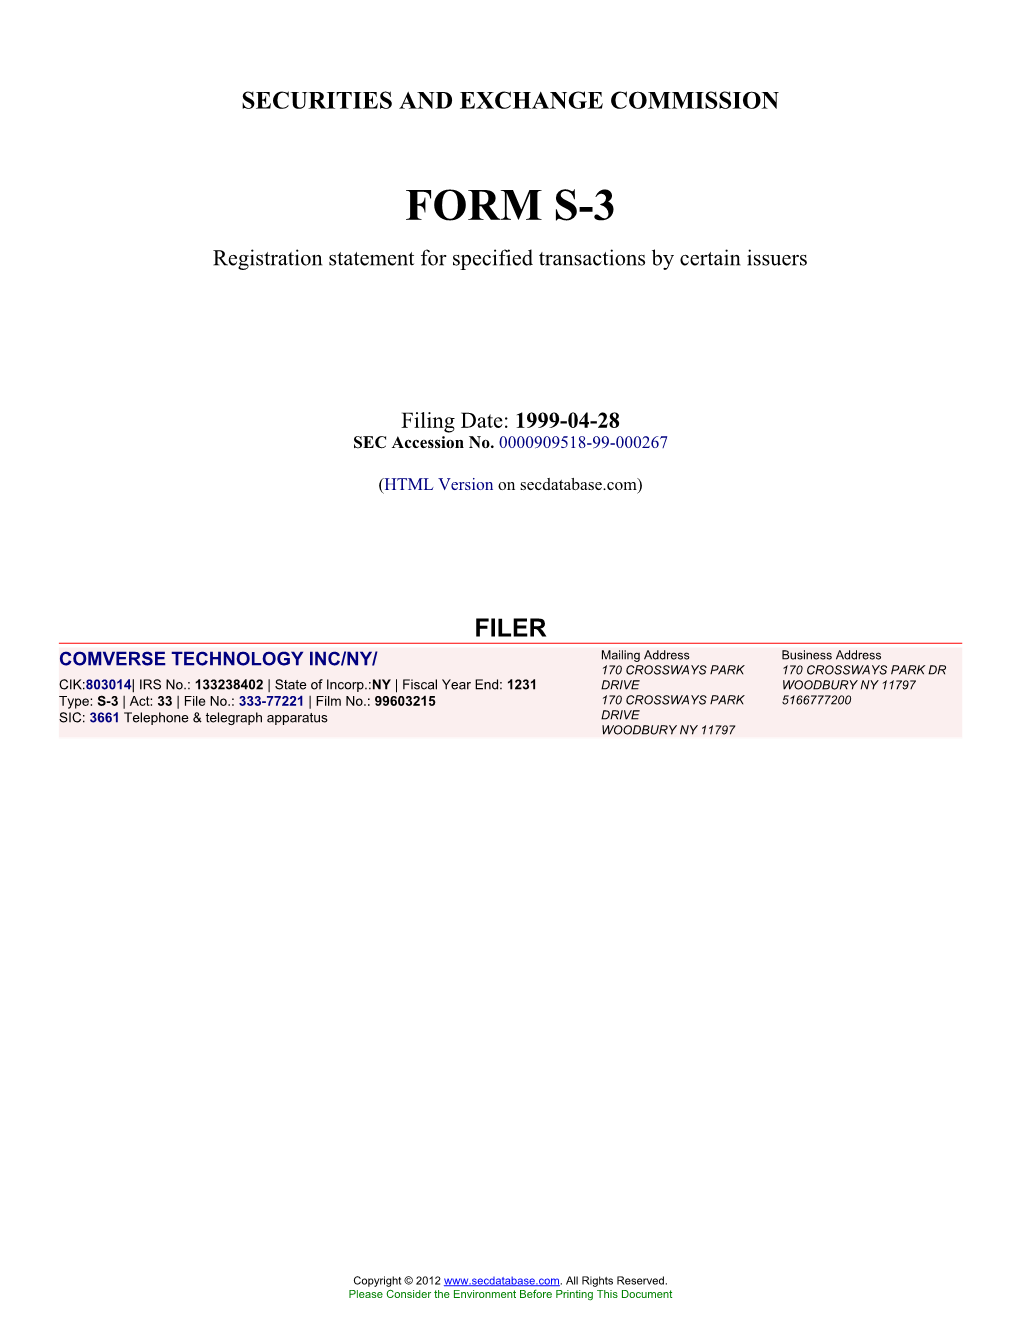 COMVERSE TECHNOLOGY INC/NY/ (Form: S-3, Filing Date: 04/28/1999)